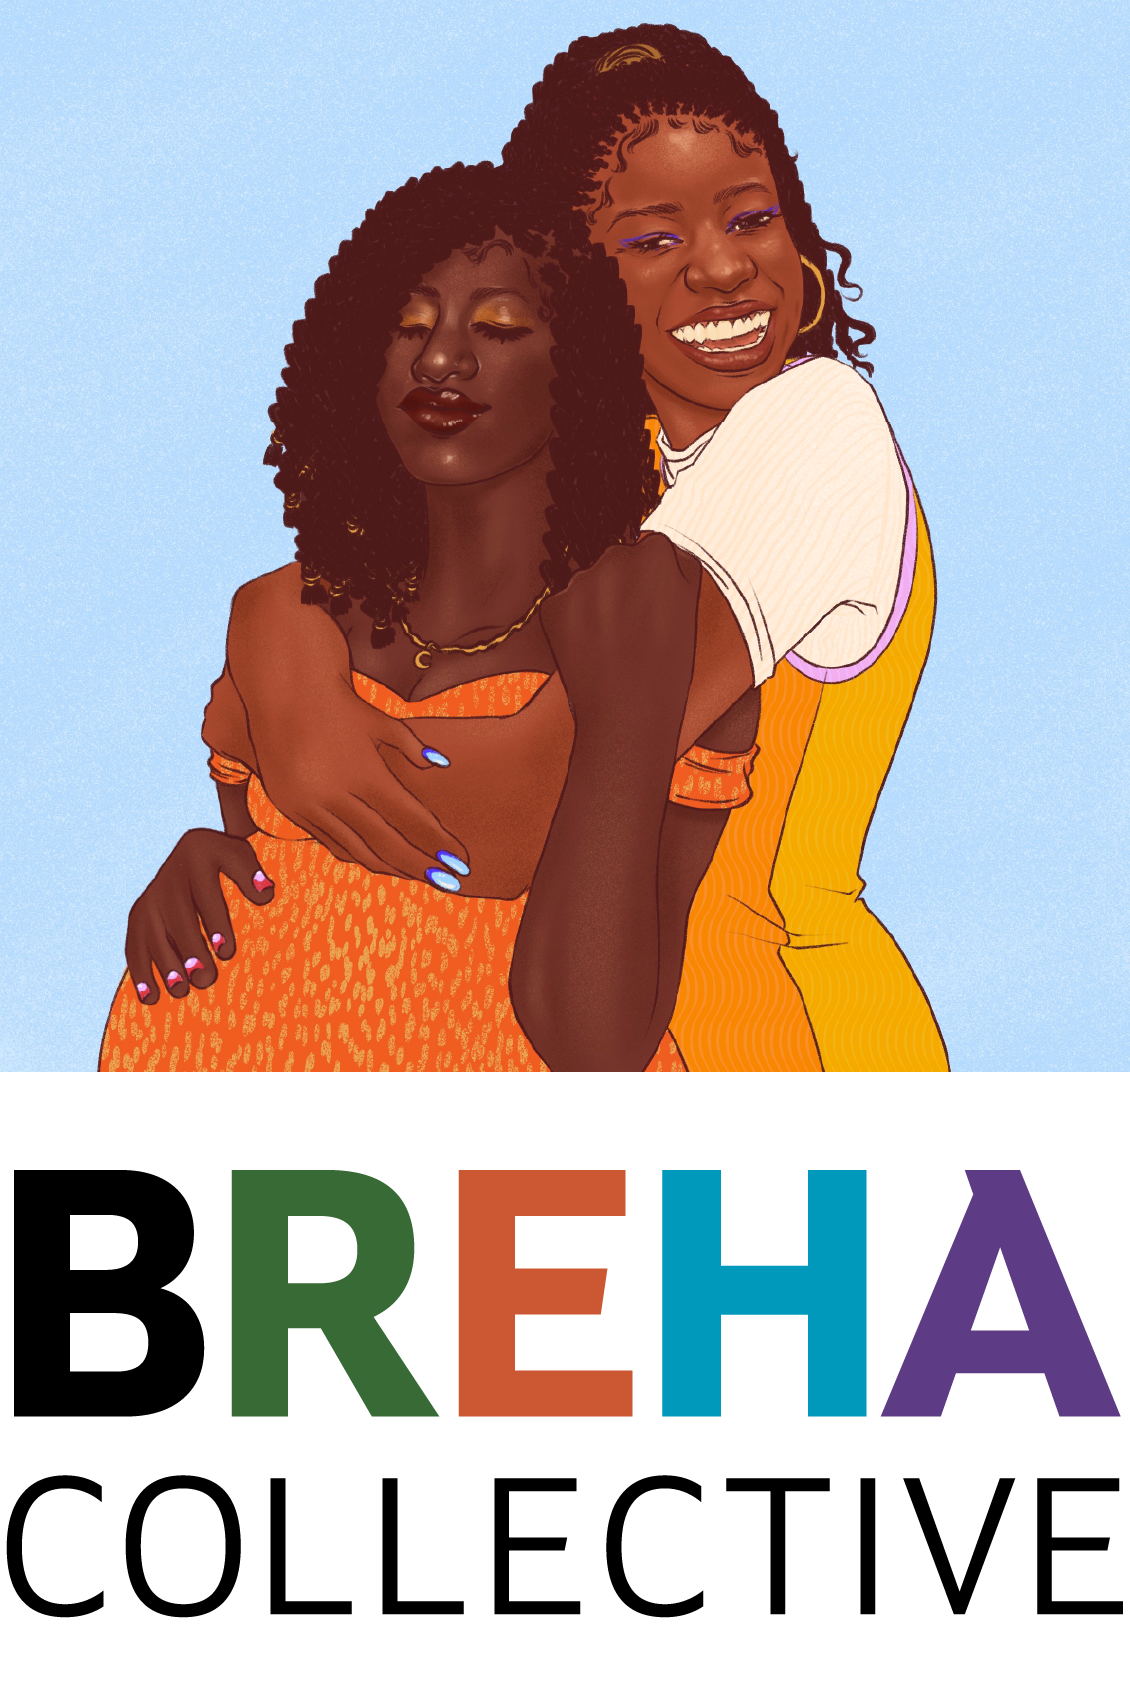 BREHA Collective logo showing a Black woman embracing another Black woman who holds a hand to her belly